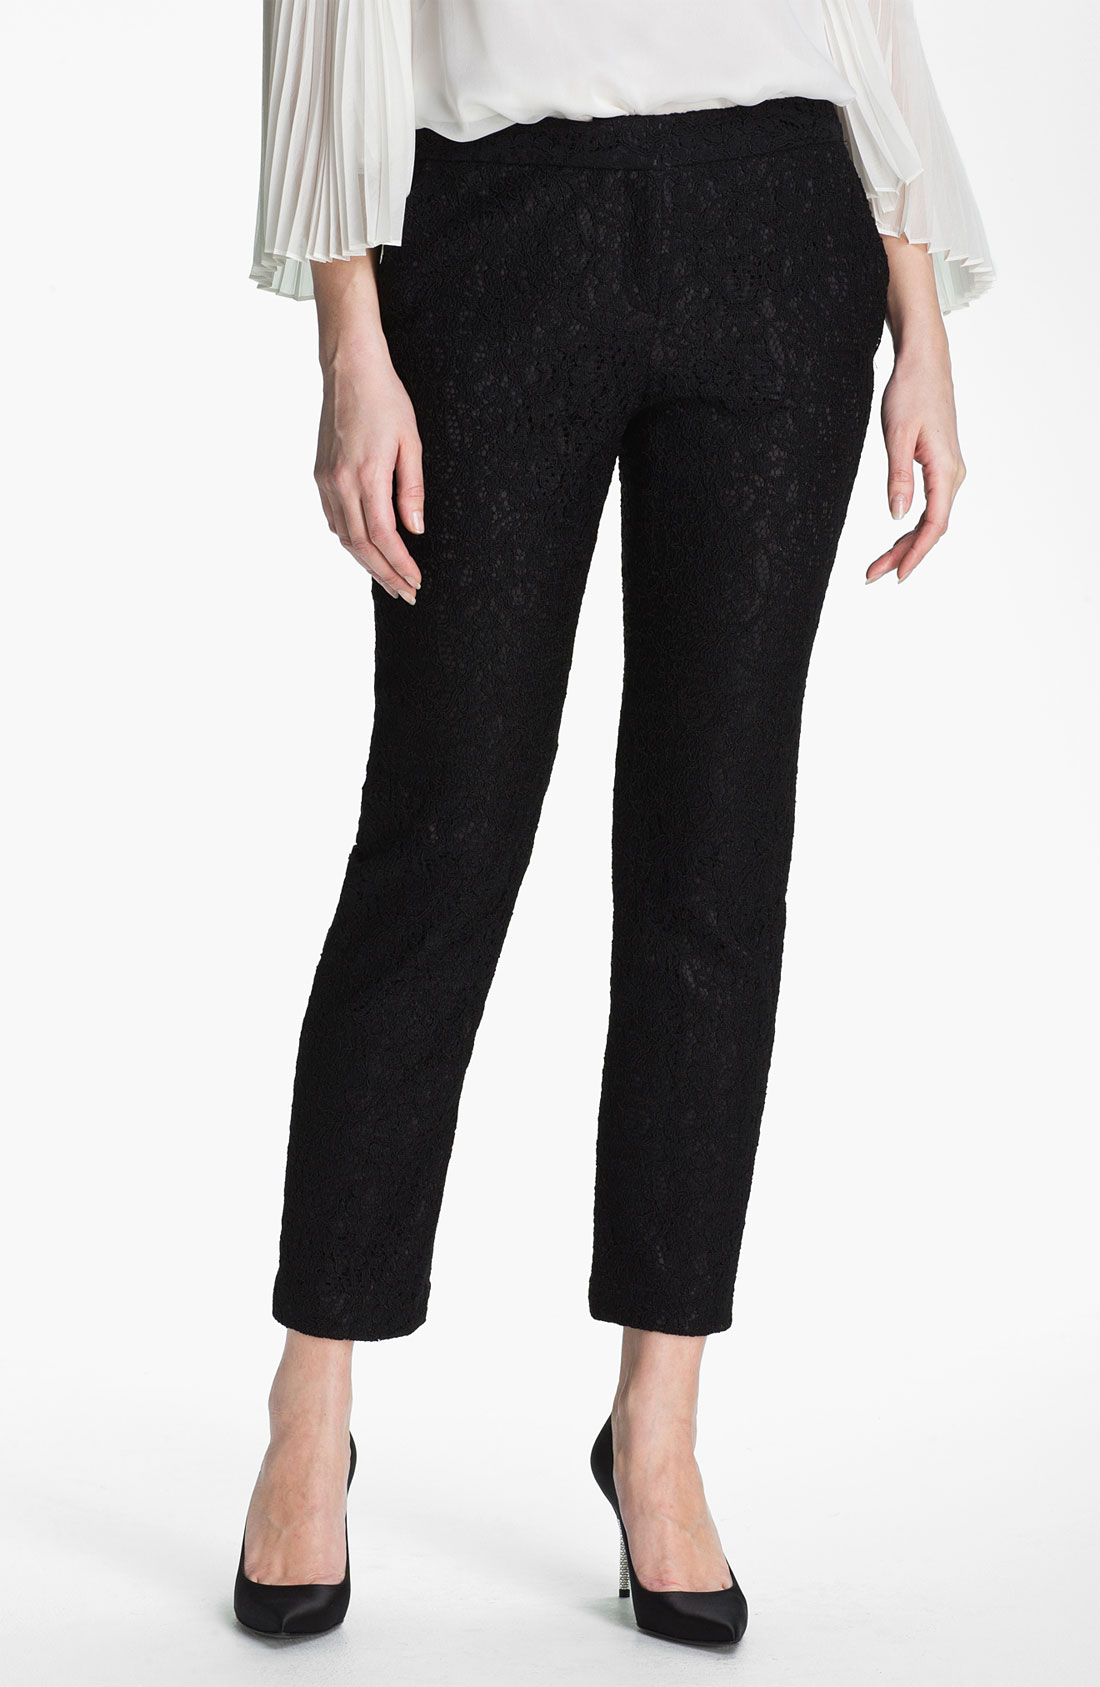 Adrianna Papell Lace Crop Pants in Black | Lyst